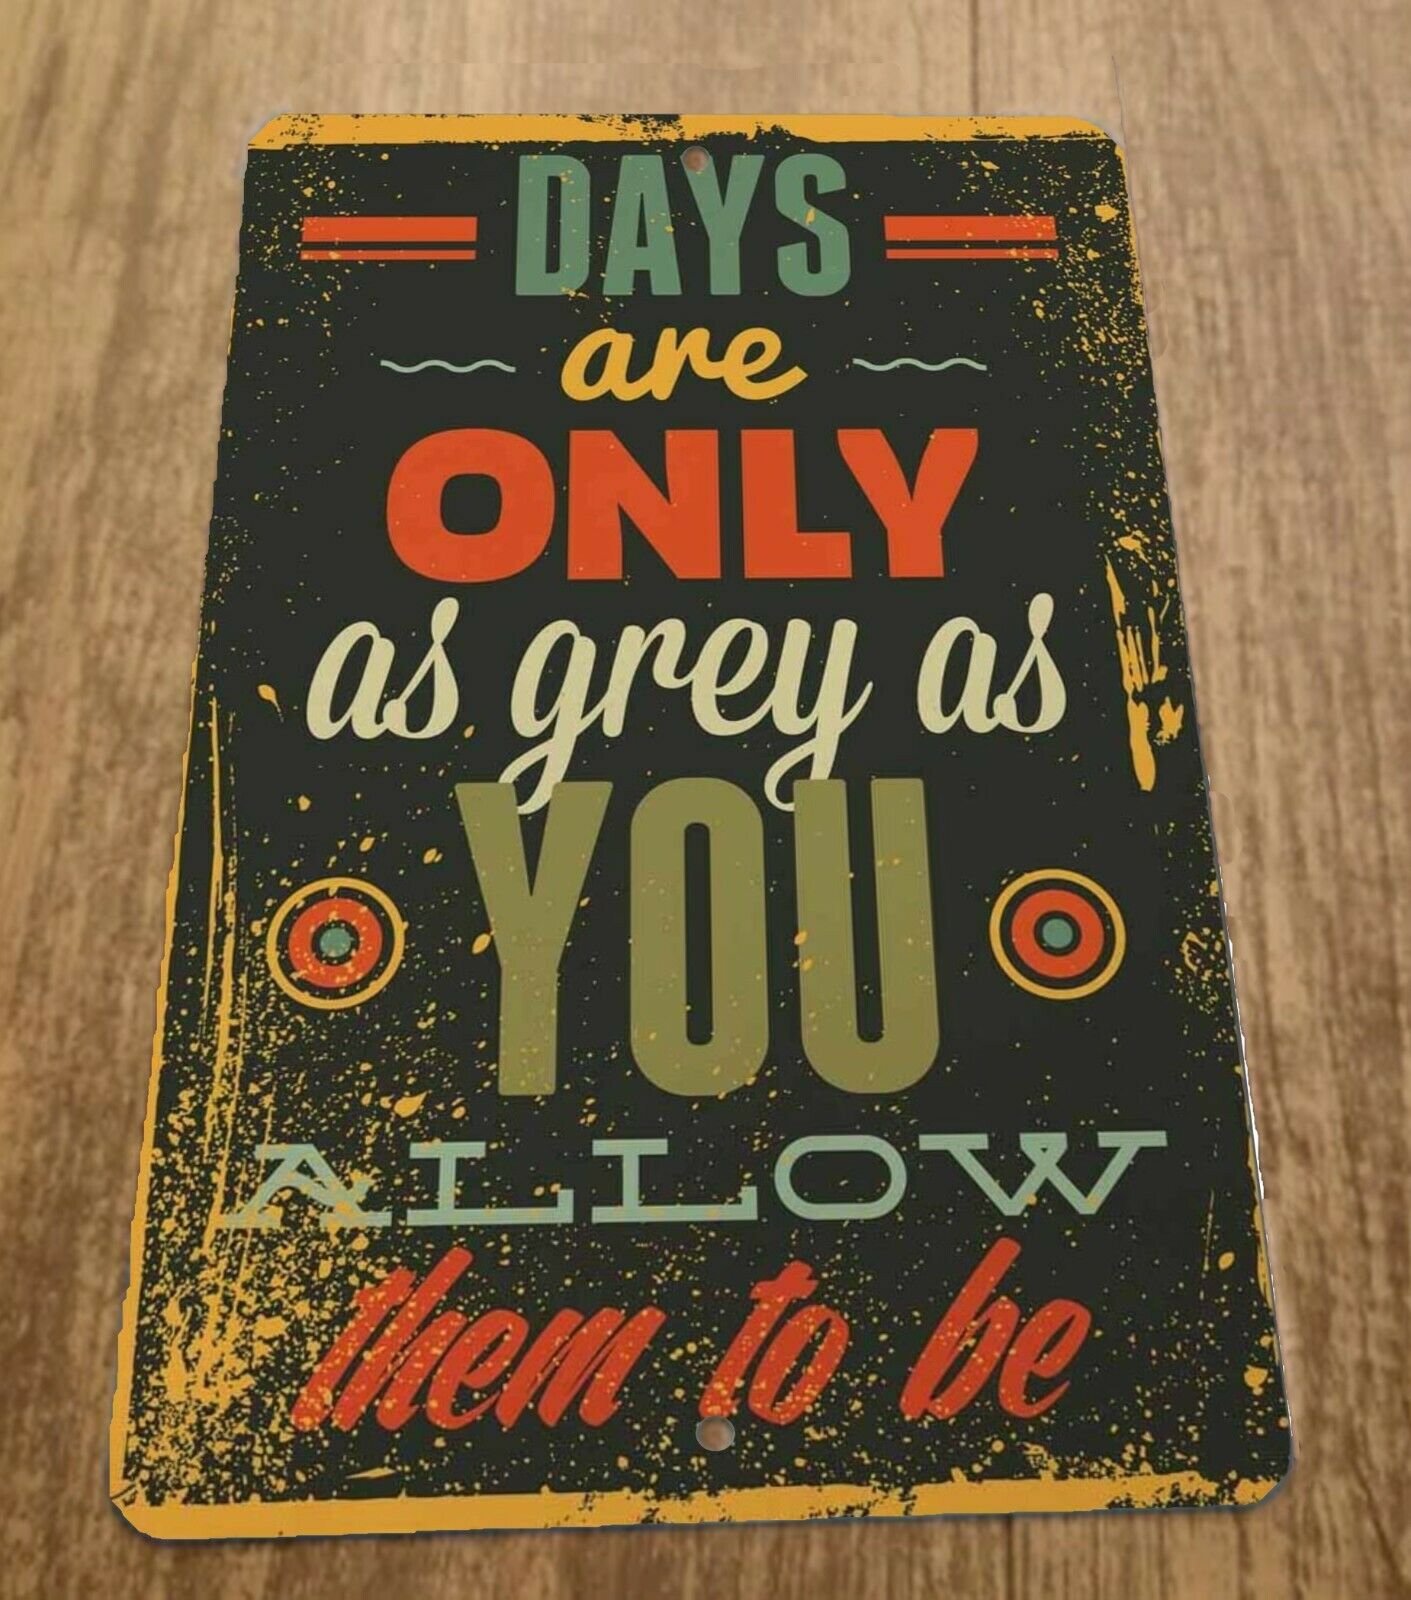 Days Are Only As Grey As You Allow Them To Be 8x12 Metal Wall Sign Misc Poster